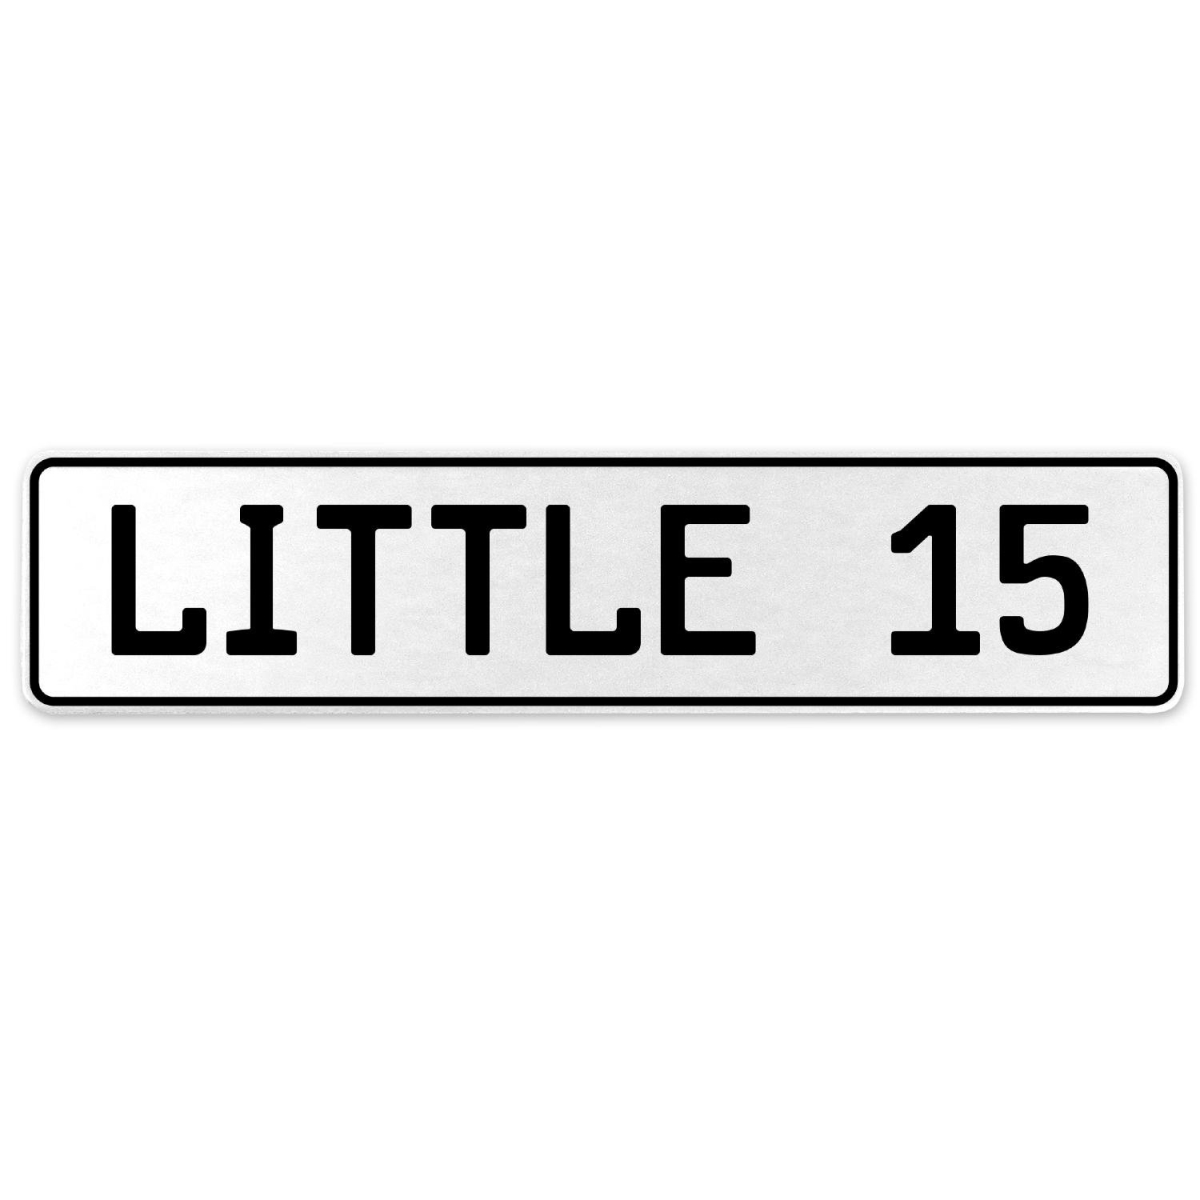 Little 15 - White Aluminum Street Sign Mancave Euro Plate Name Door Sign Wall